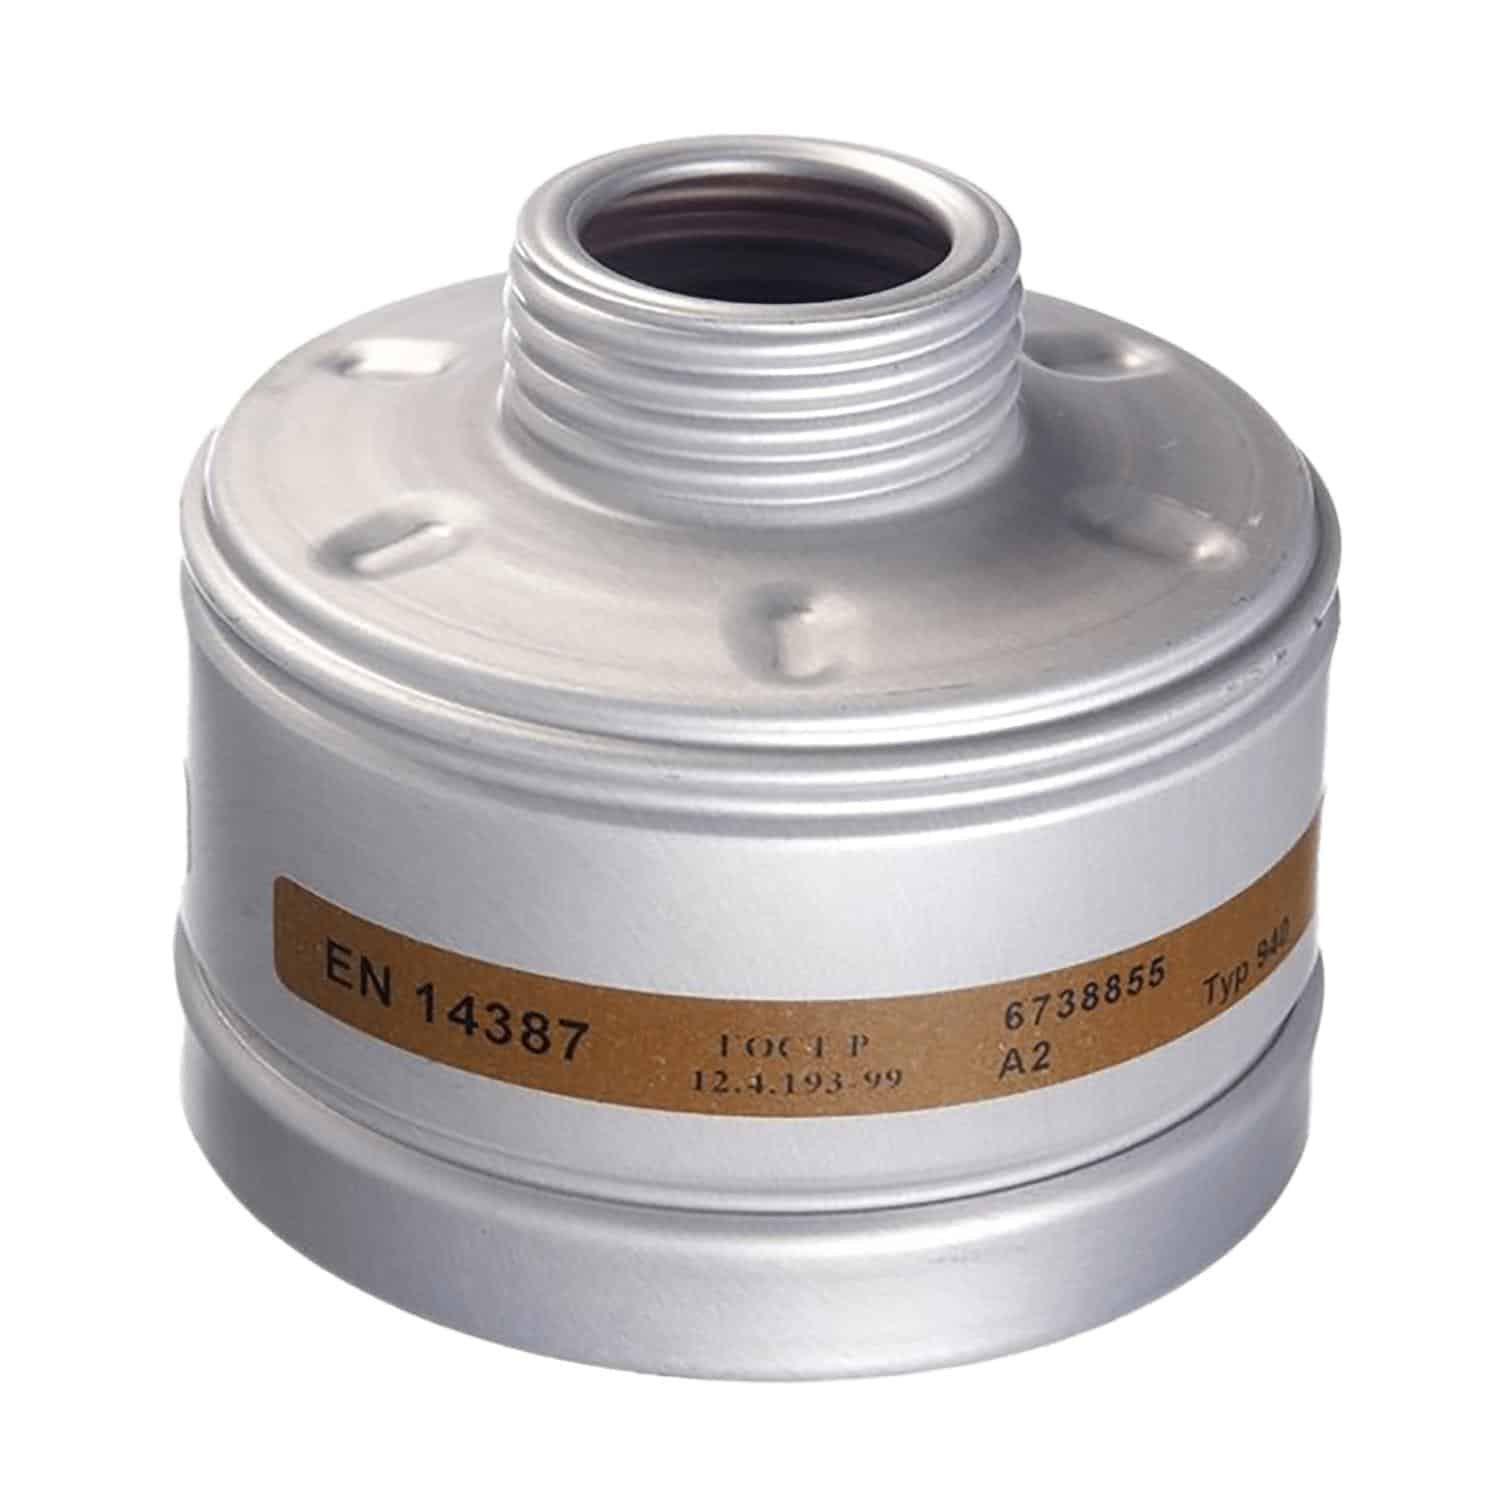 Draeger-Gasfilter-940-A2